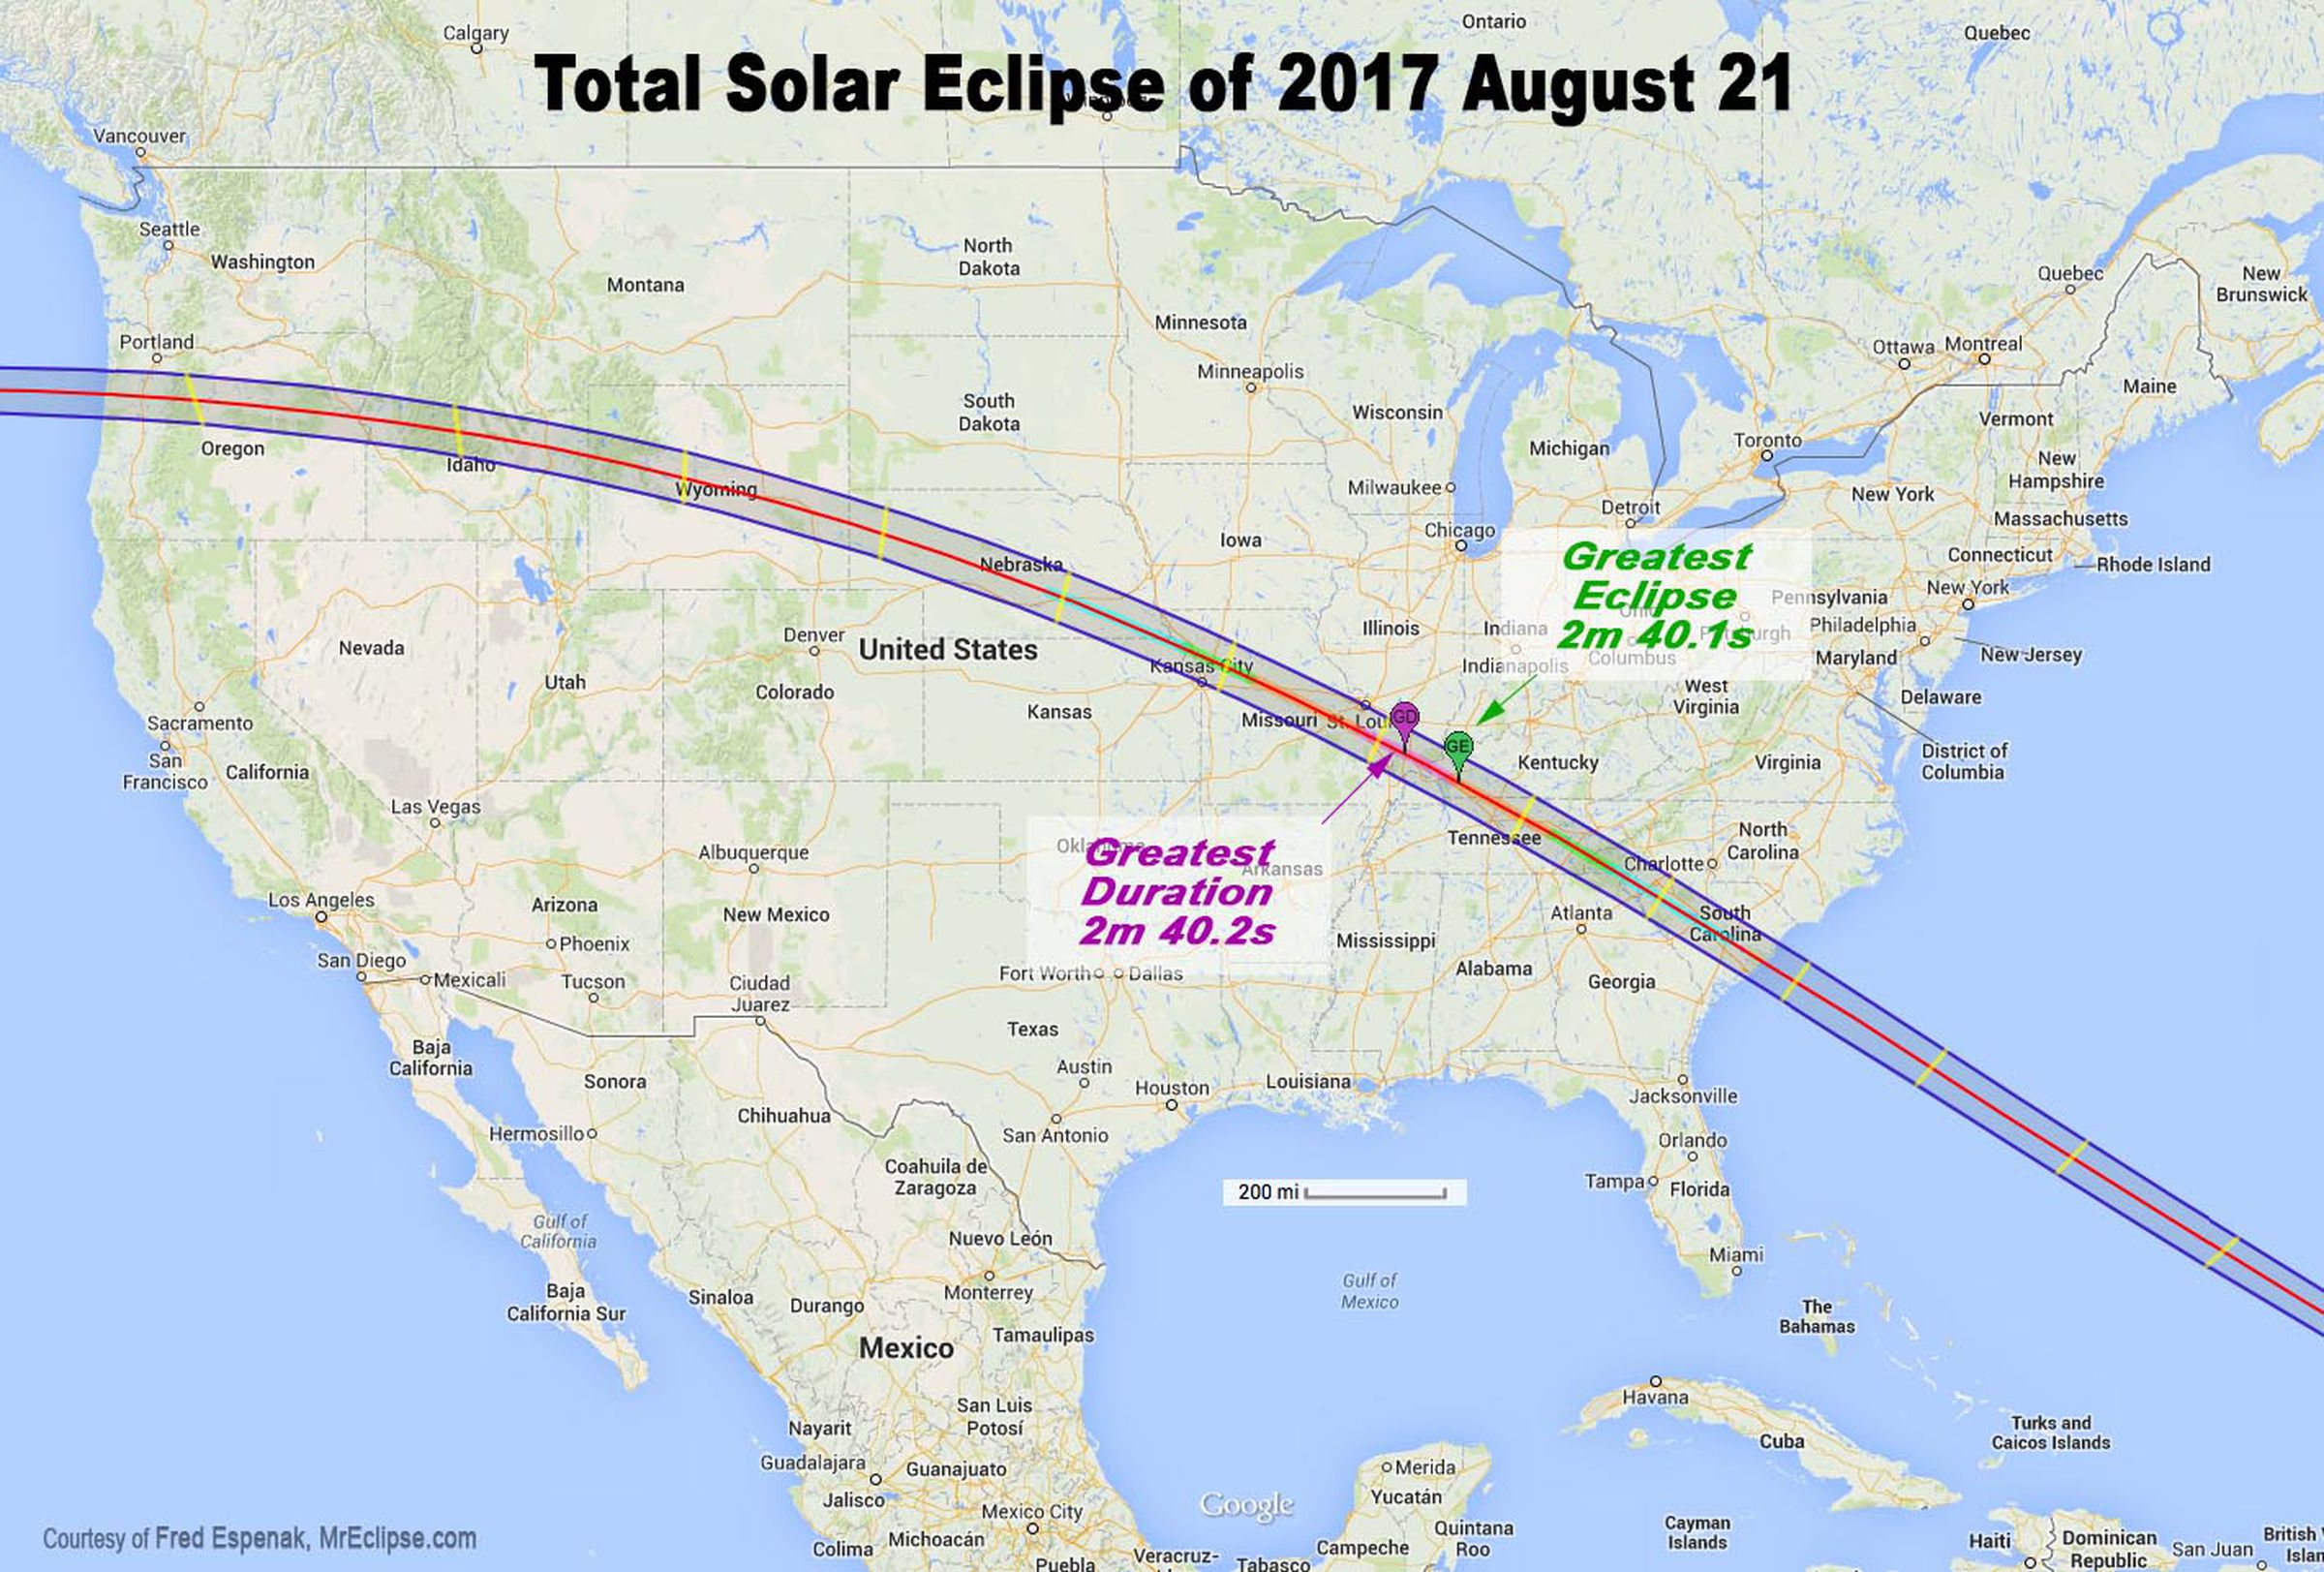 The path of the total solar eclipse in August.